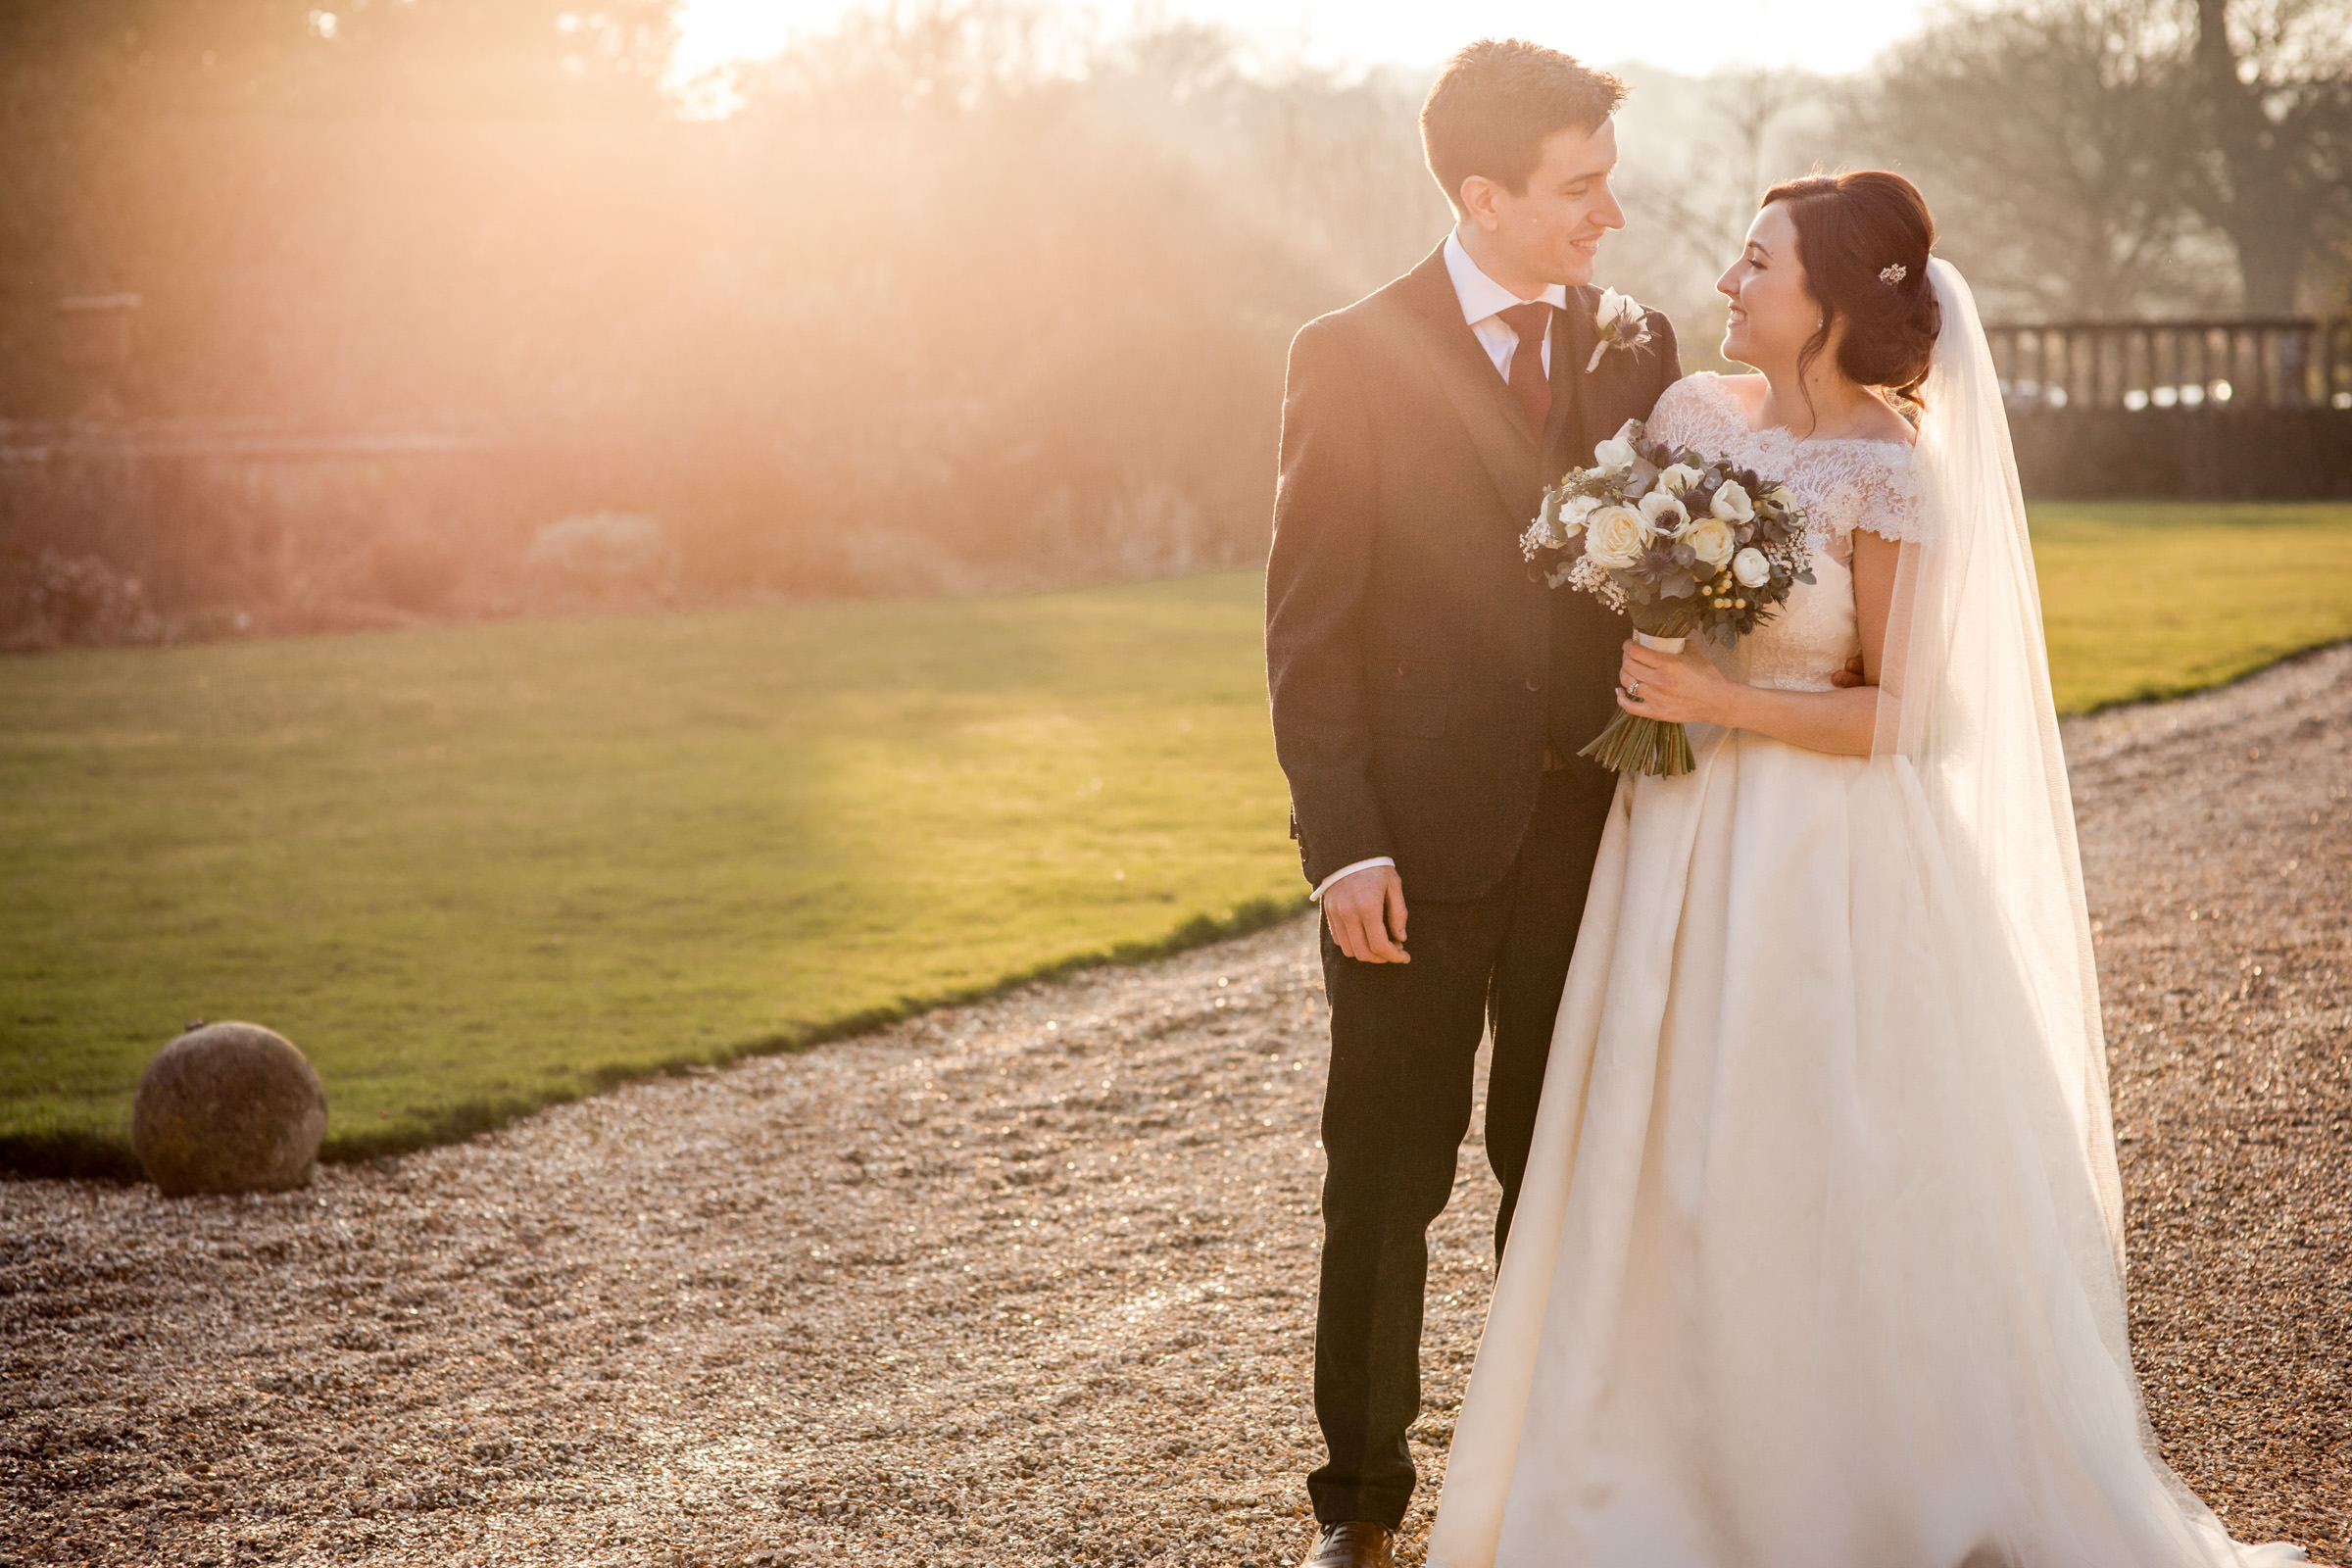 relaxed wedding photography at in somerset 019.jpg